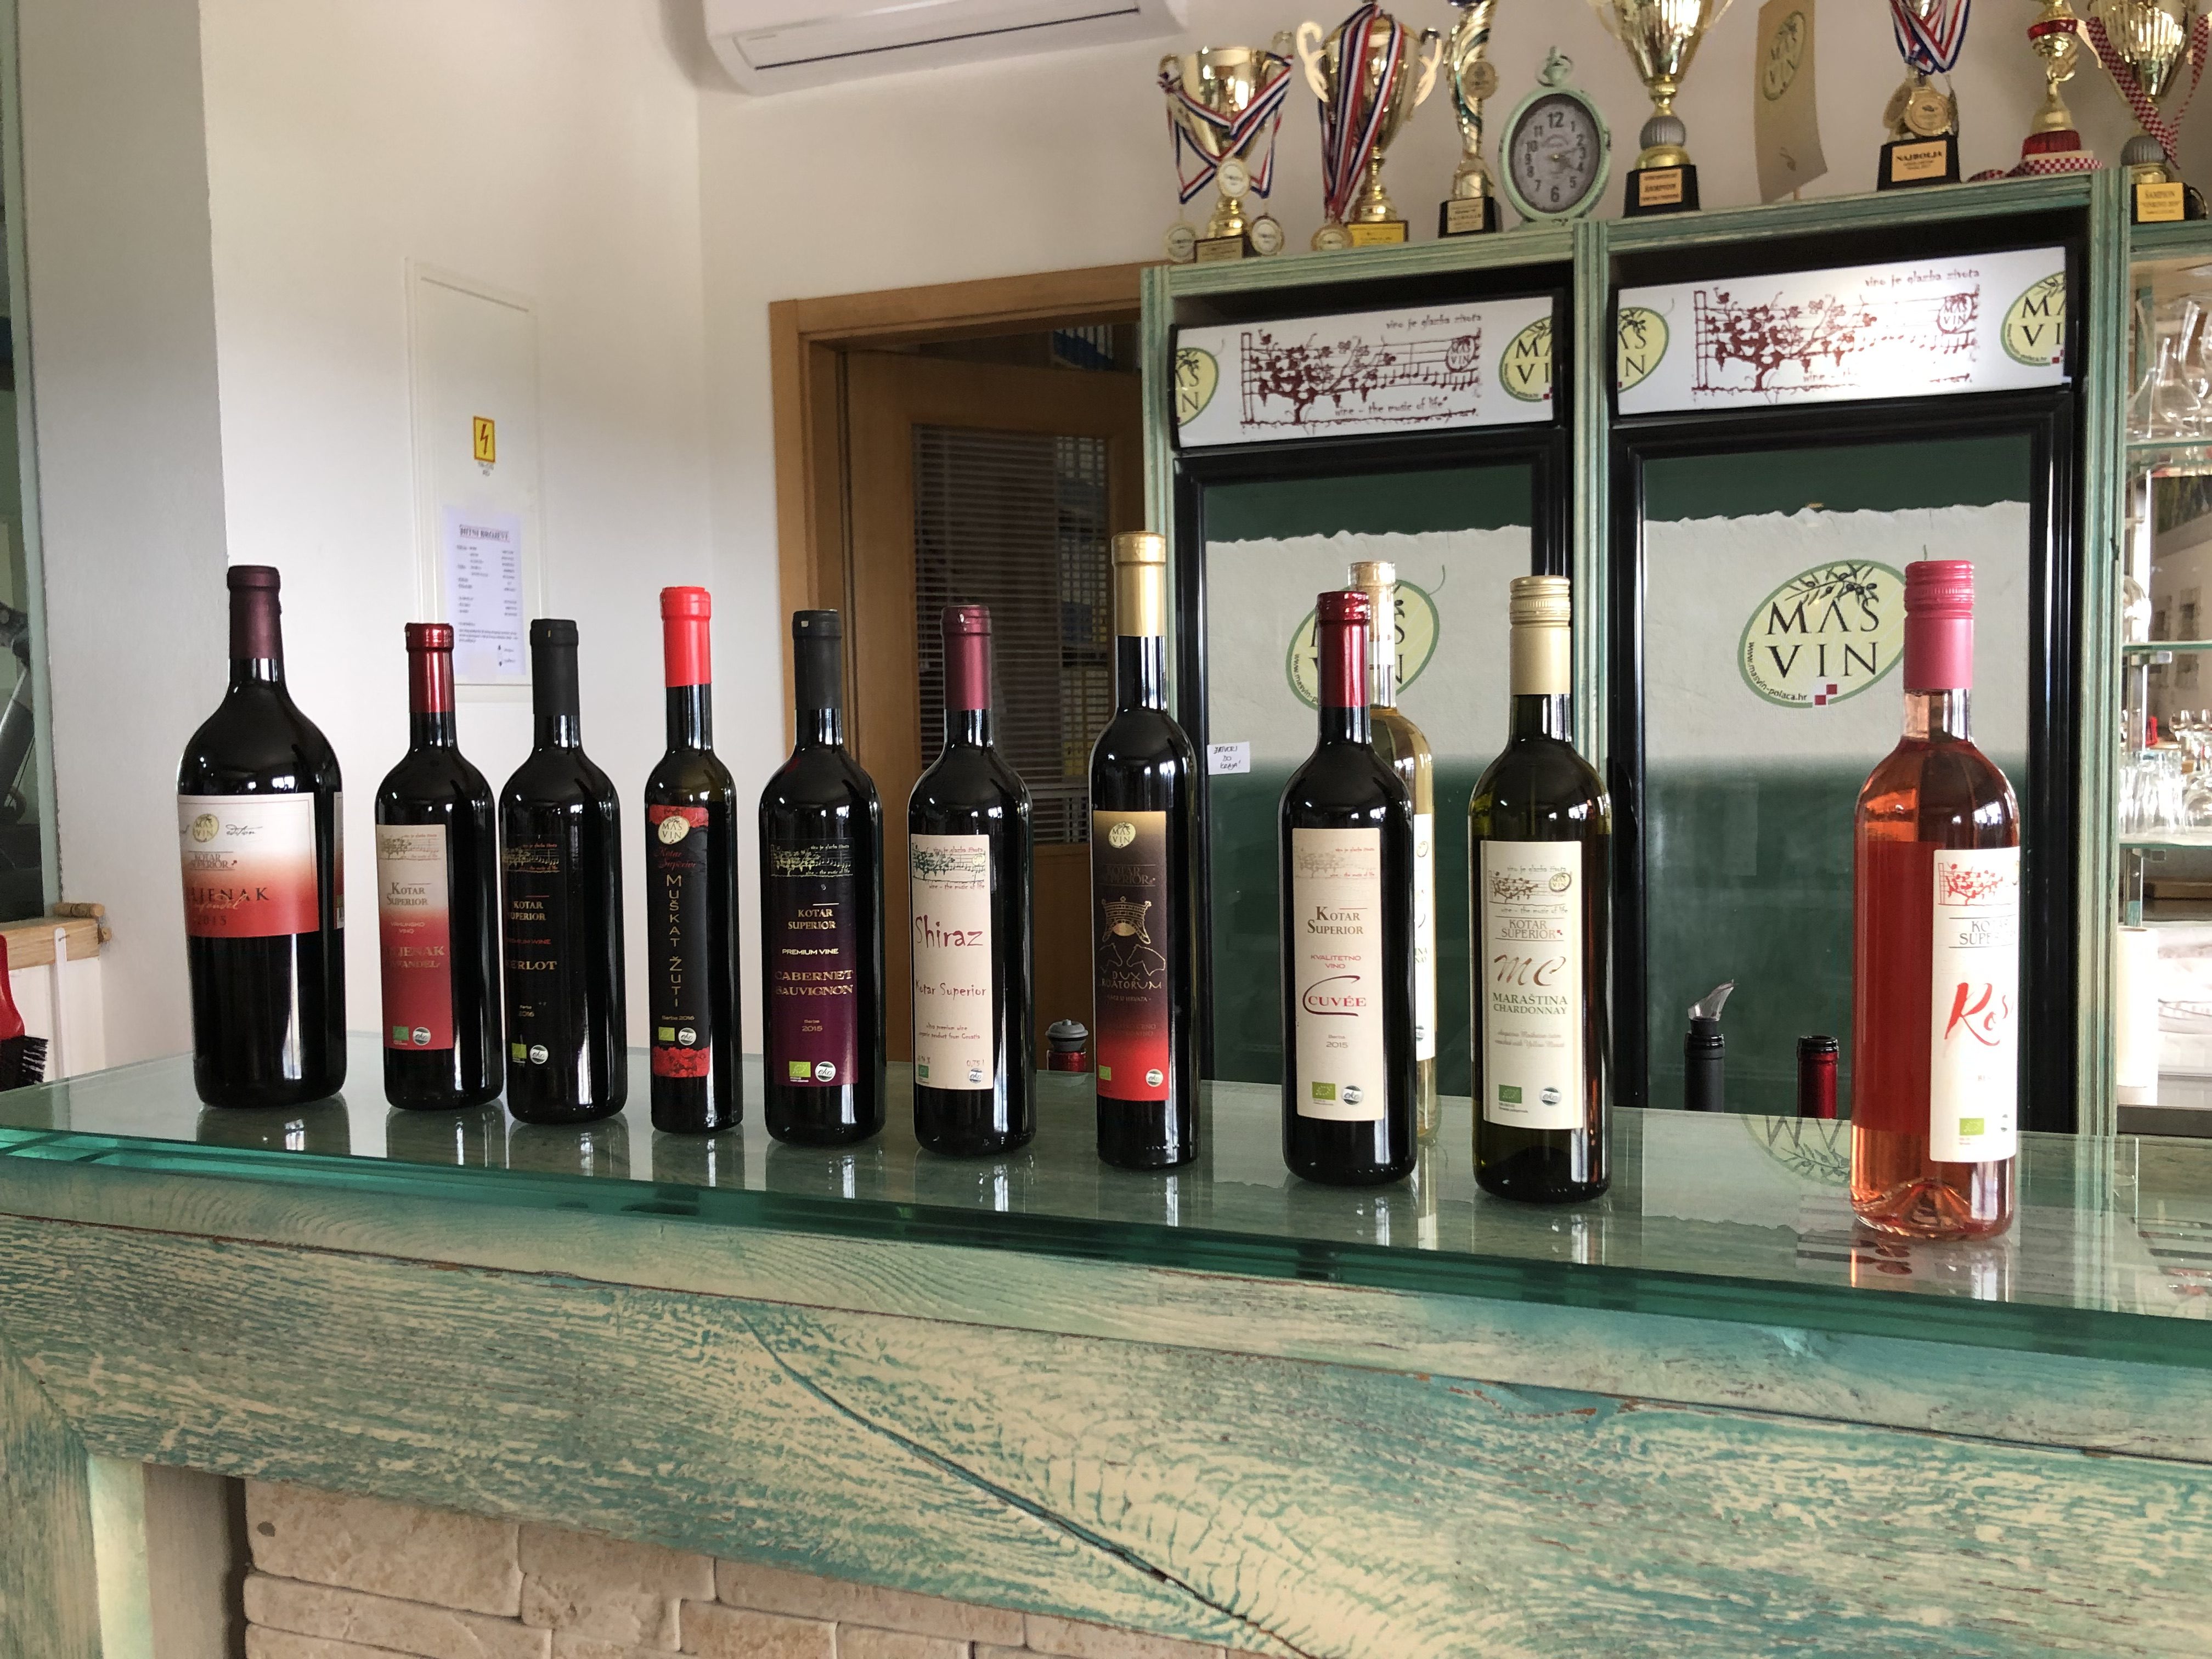 A collection of Mas Vin current selection.